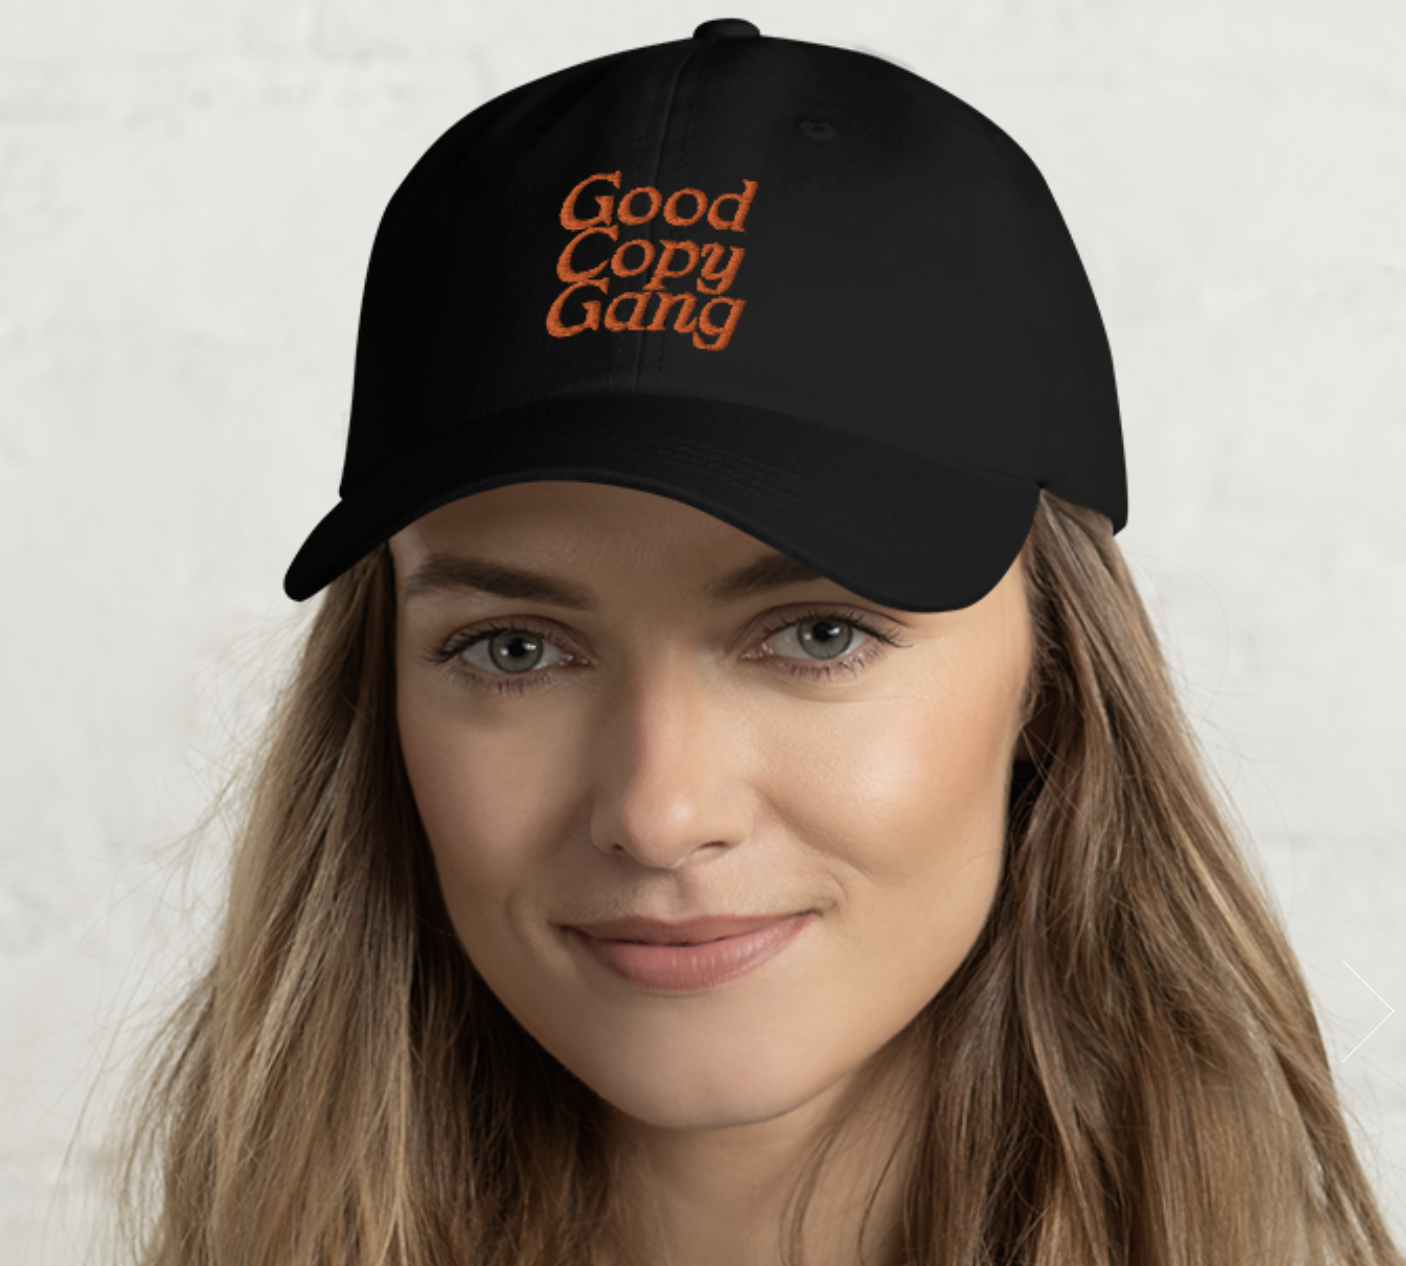 photo of a woman wearing a black hat with orange letters that reads "Good Copy Gang"